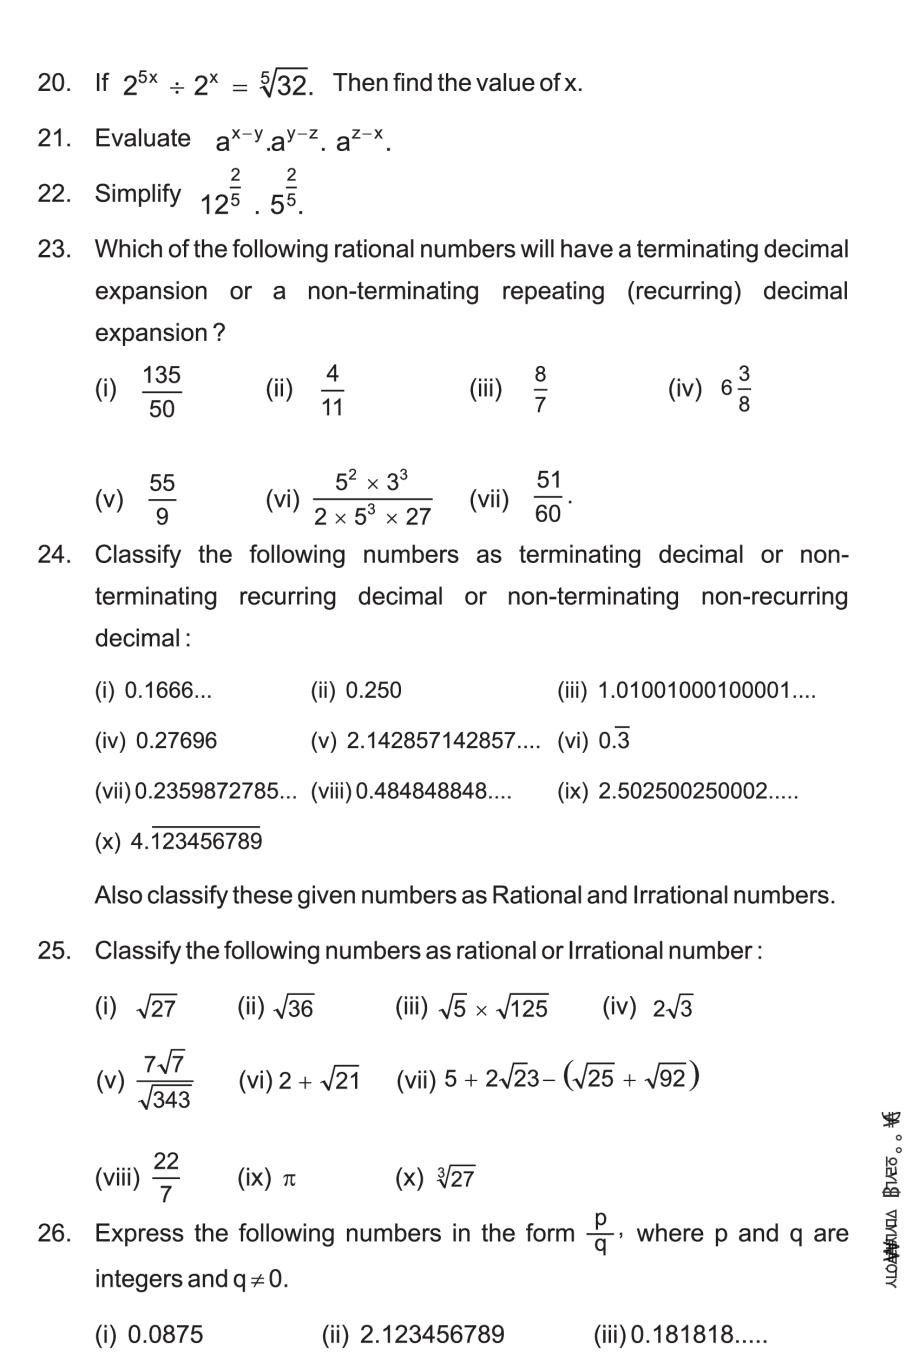 maths assignment for class 9 number system